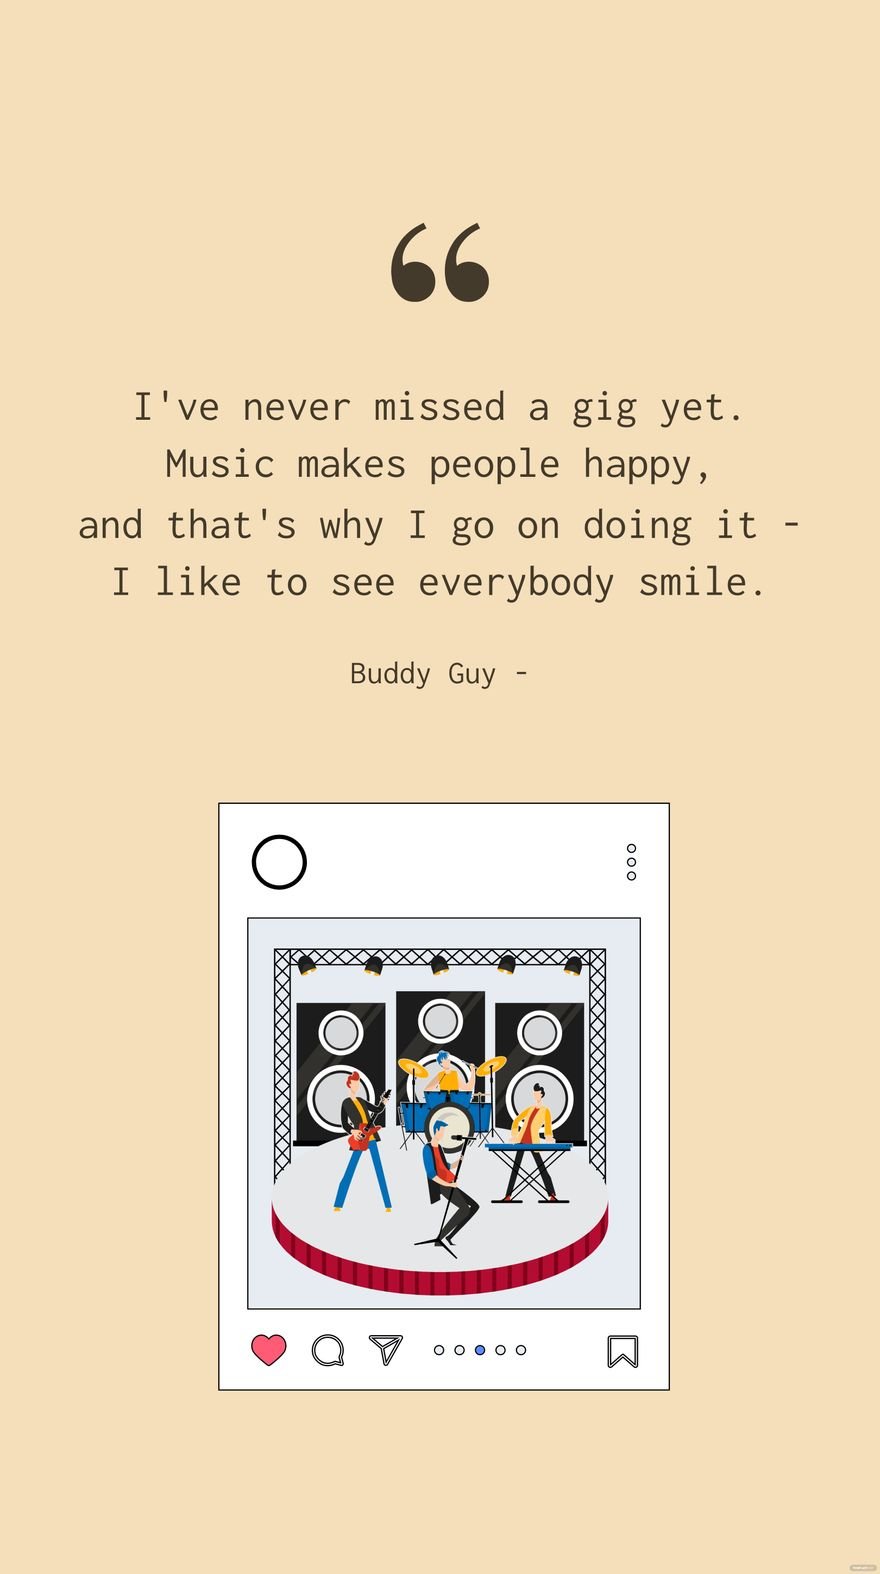 Buddy Guy - I've never missed a gig yet. Music makes people happy, and that's why I go on doing it - I like to see everybody smile. in JPG